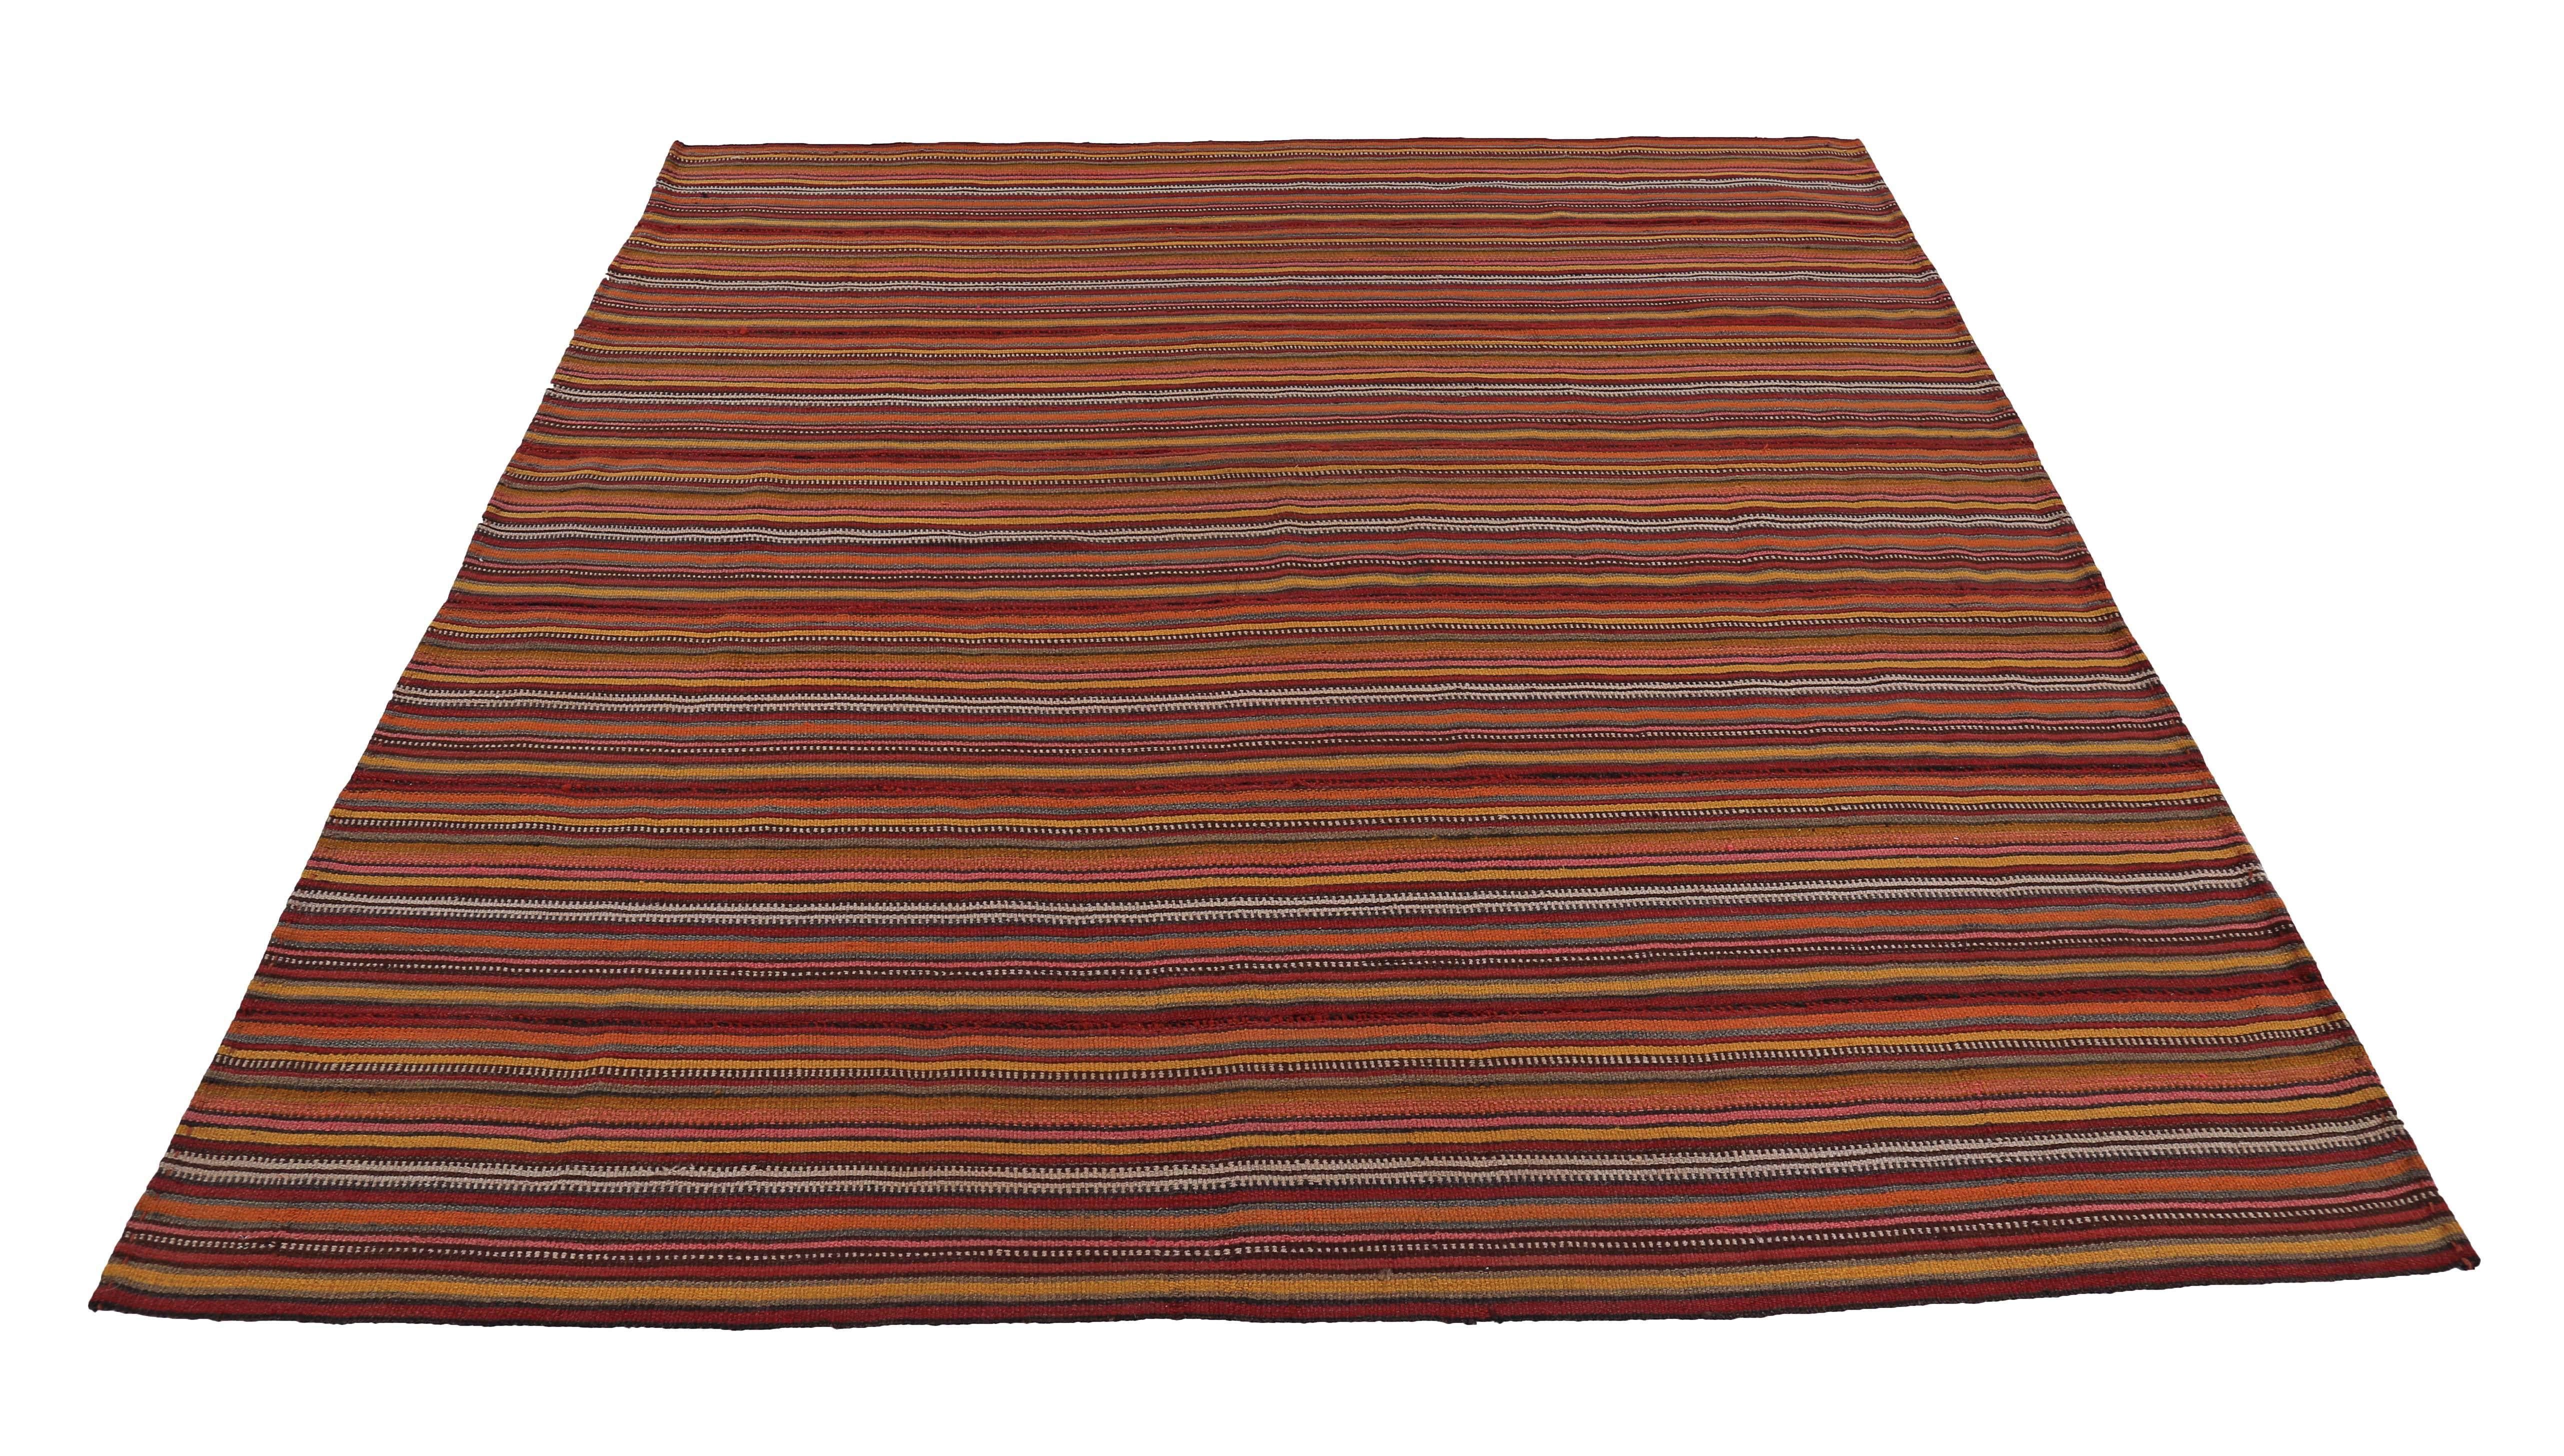 Turkish rug handwoven from the finest sheep’s wool and colored with all-natural vegetable dyes that are safe for humans and pets. It’s a traditional Kilim flat-weave design featuring orange, red and beige pencil stripes. It’s a stunning piece to get